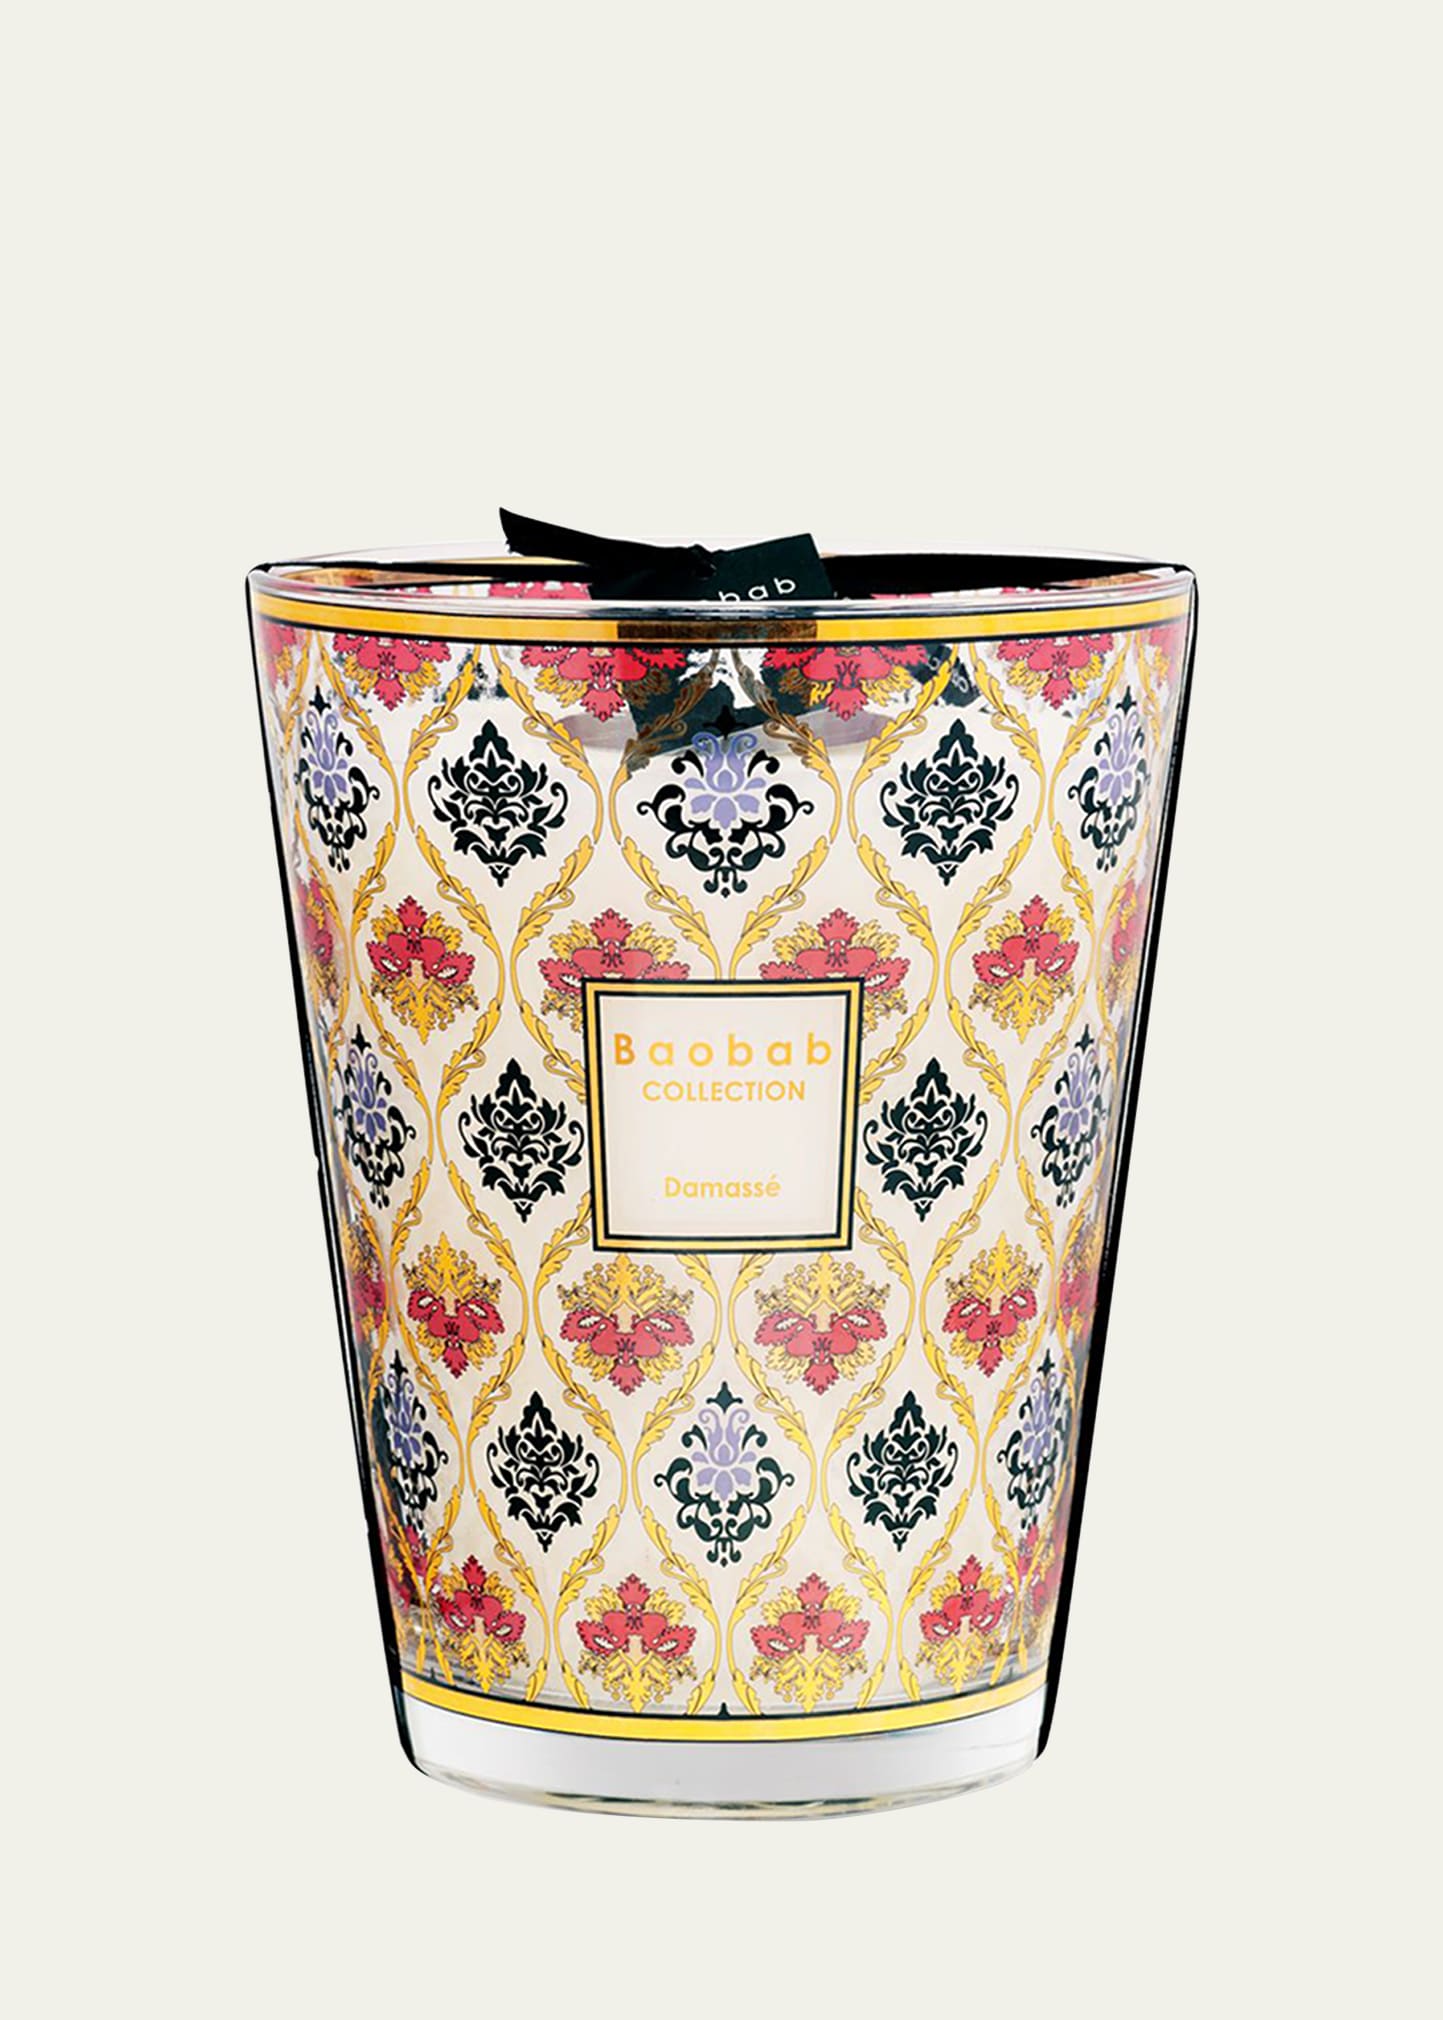 Baobab Collection 176 Oz. Damasse Max 24 Candle In Multi